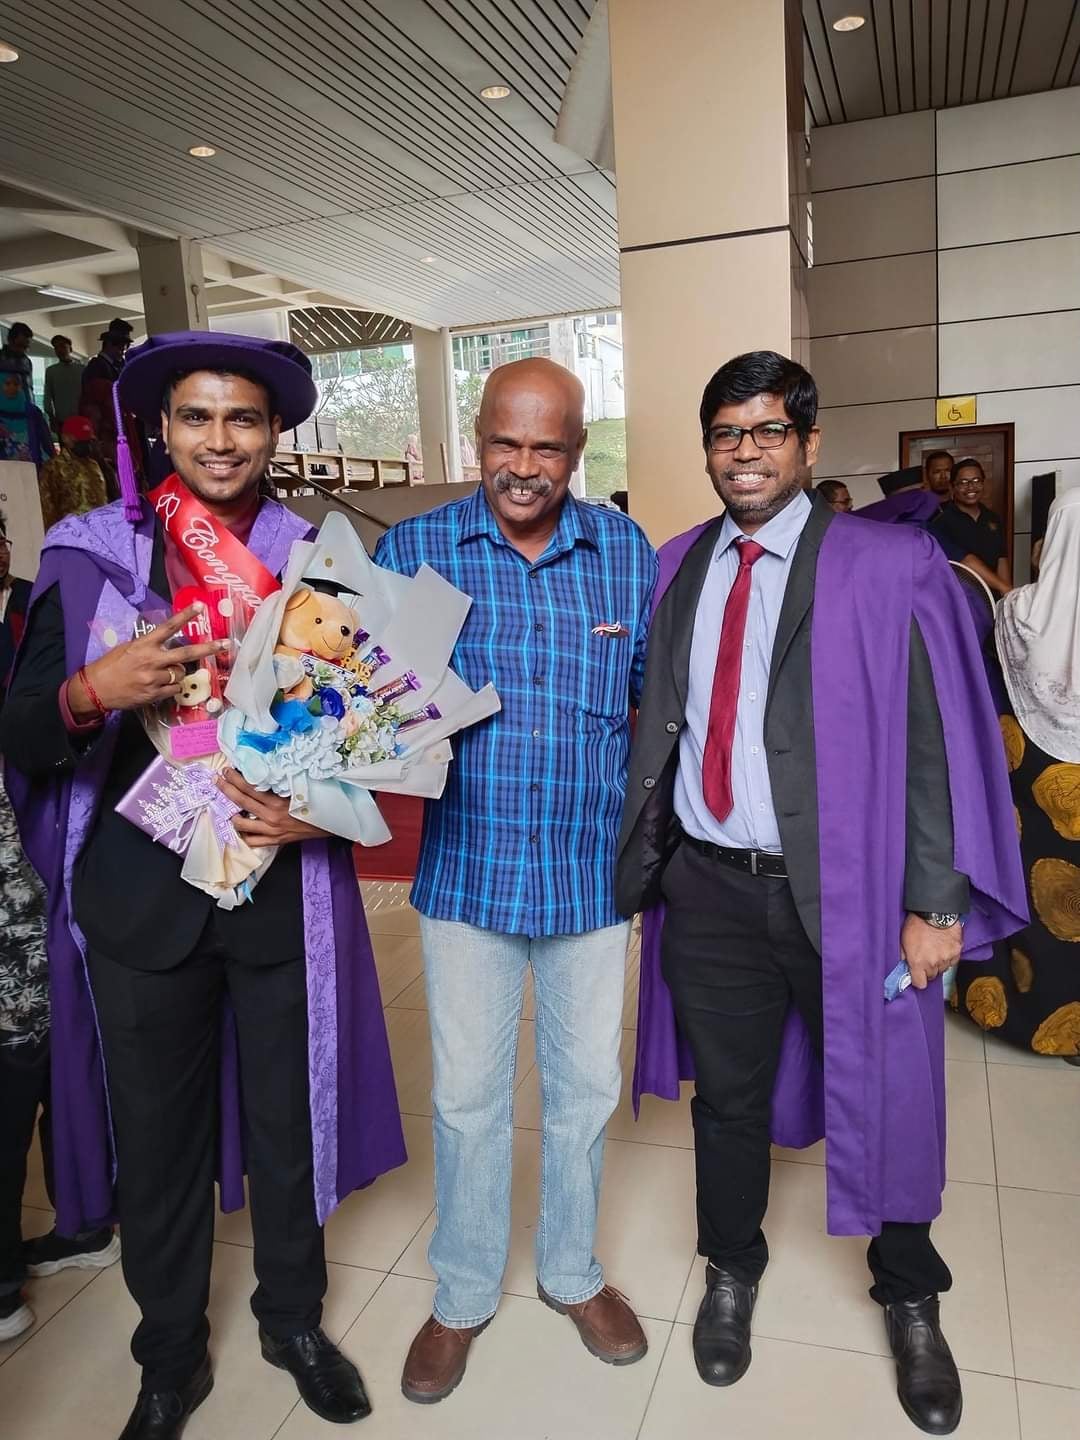 Three Indian men smiling, two of whom are wearing a purple graduation robe and one man holding a bouquet of chocolates and a teddybear.